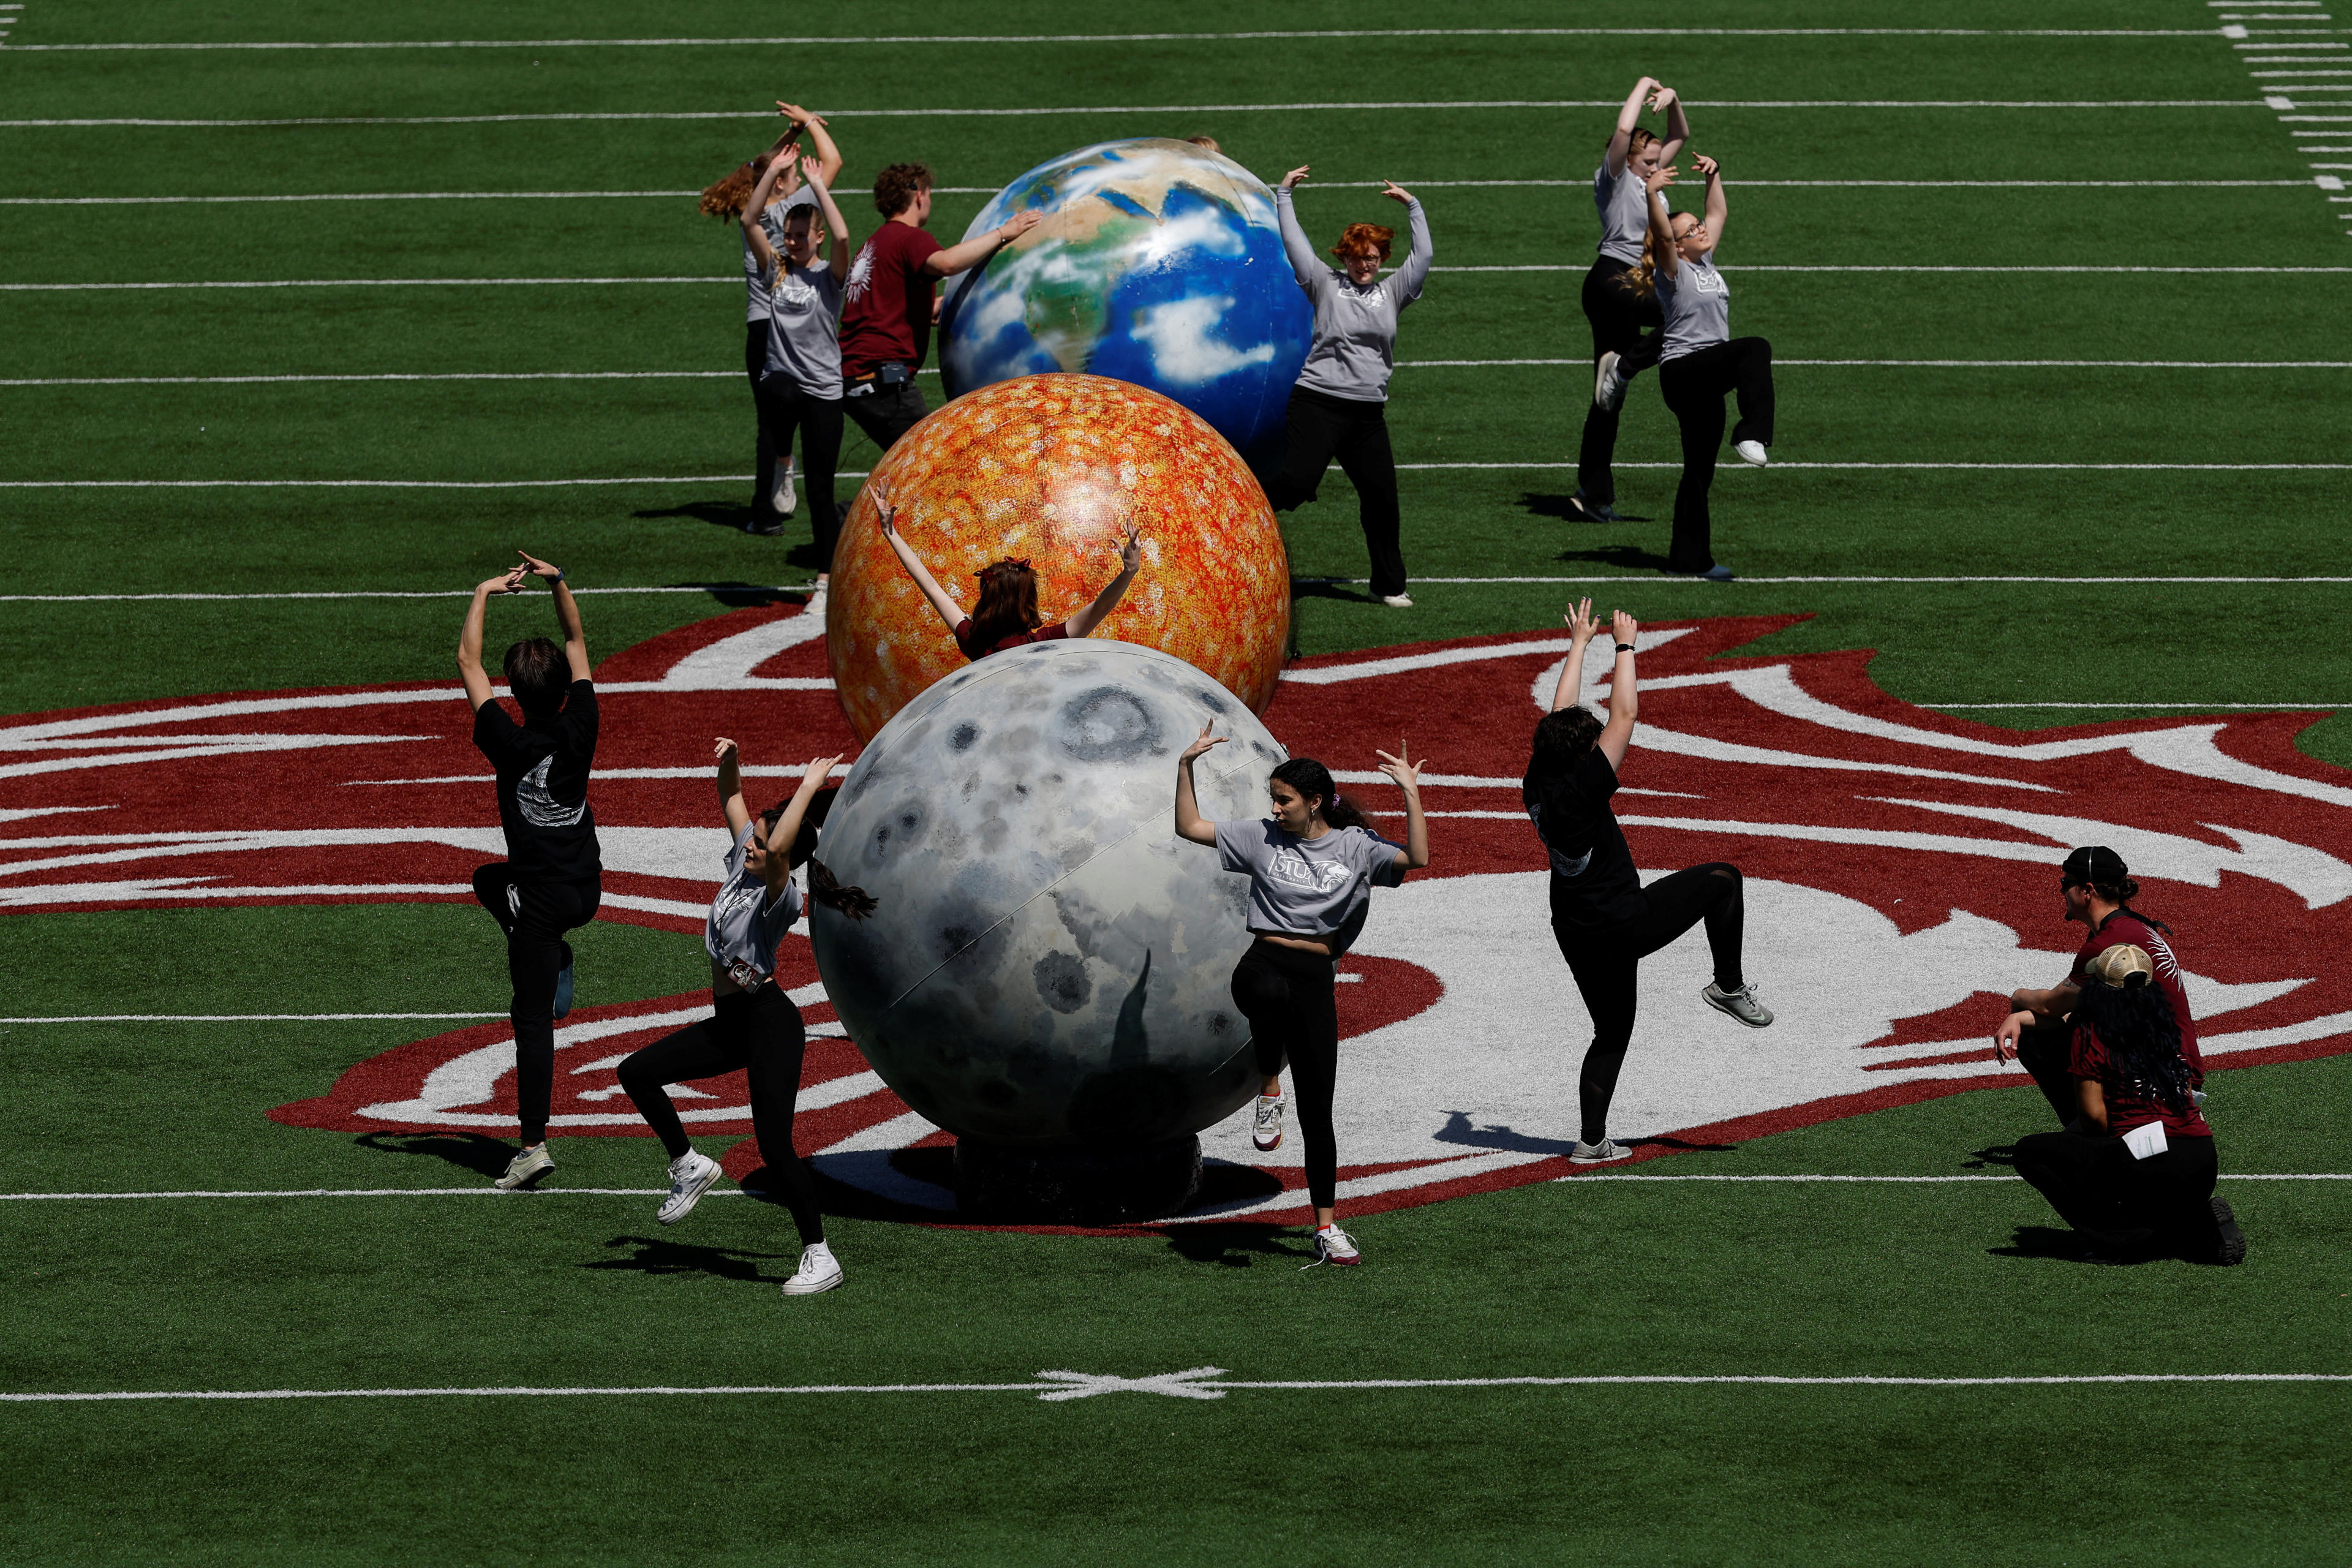 People dance next to representations of the earth, sun and moon at Saluki Stadium, ahead of a total solar eclipse, where the moon will blot out the sun, in Carbondale, Illinois on April 8, 2024. (Evelyn Hockstein/Reuters)